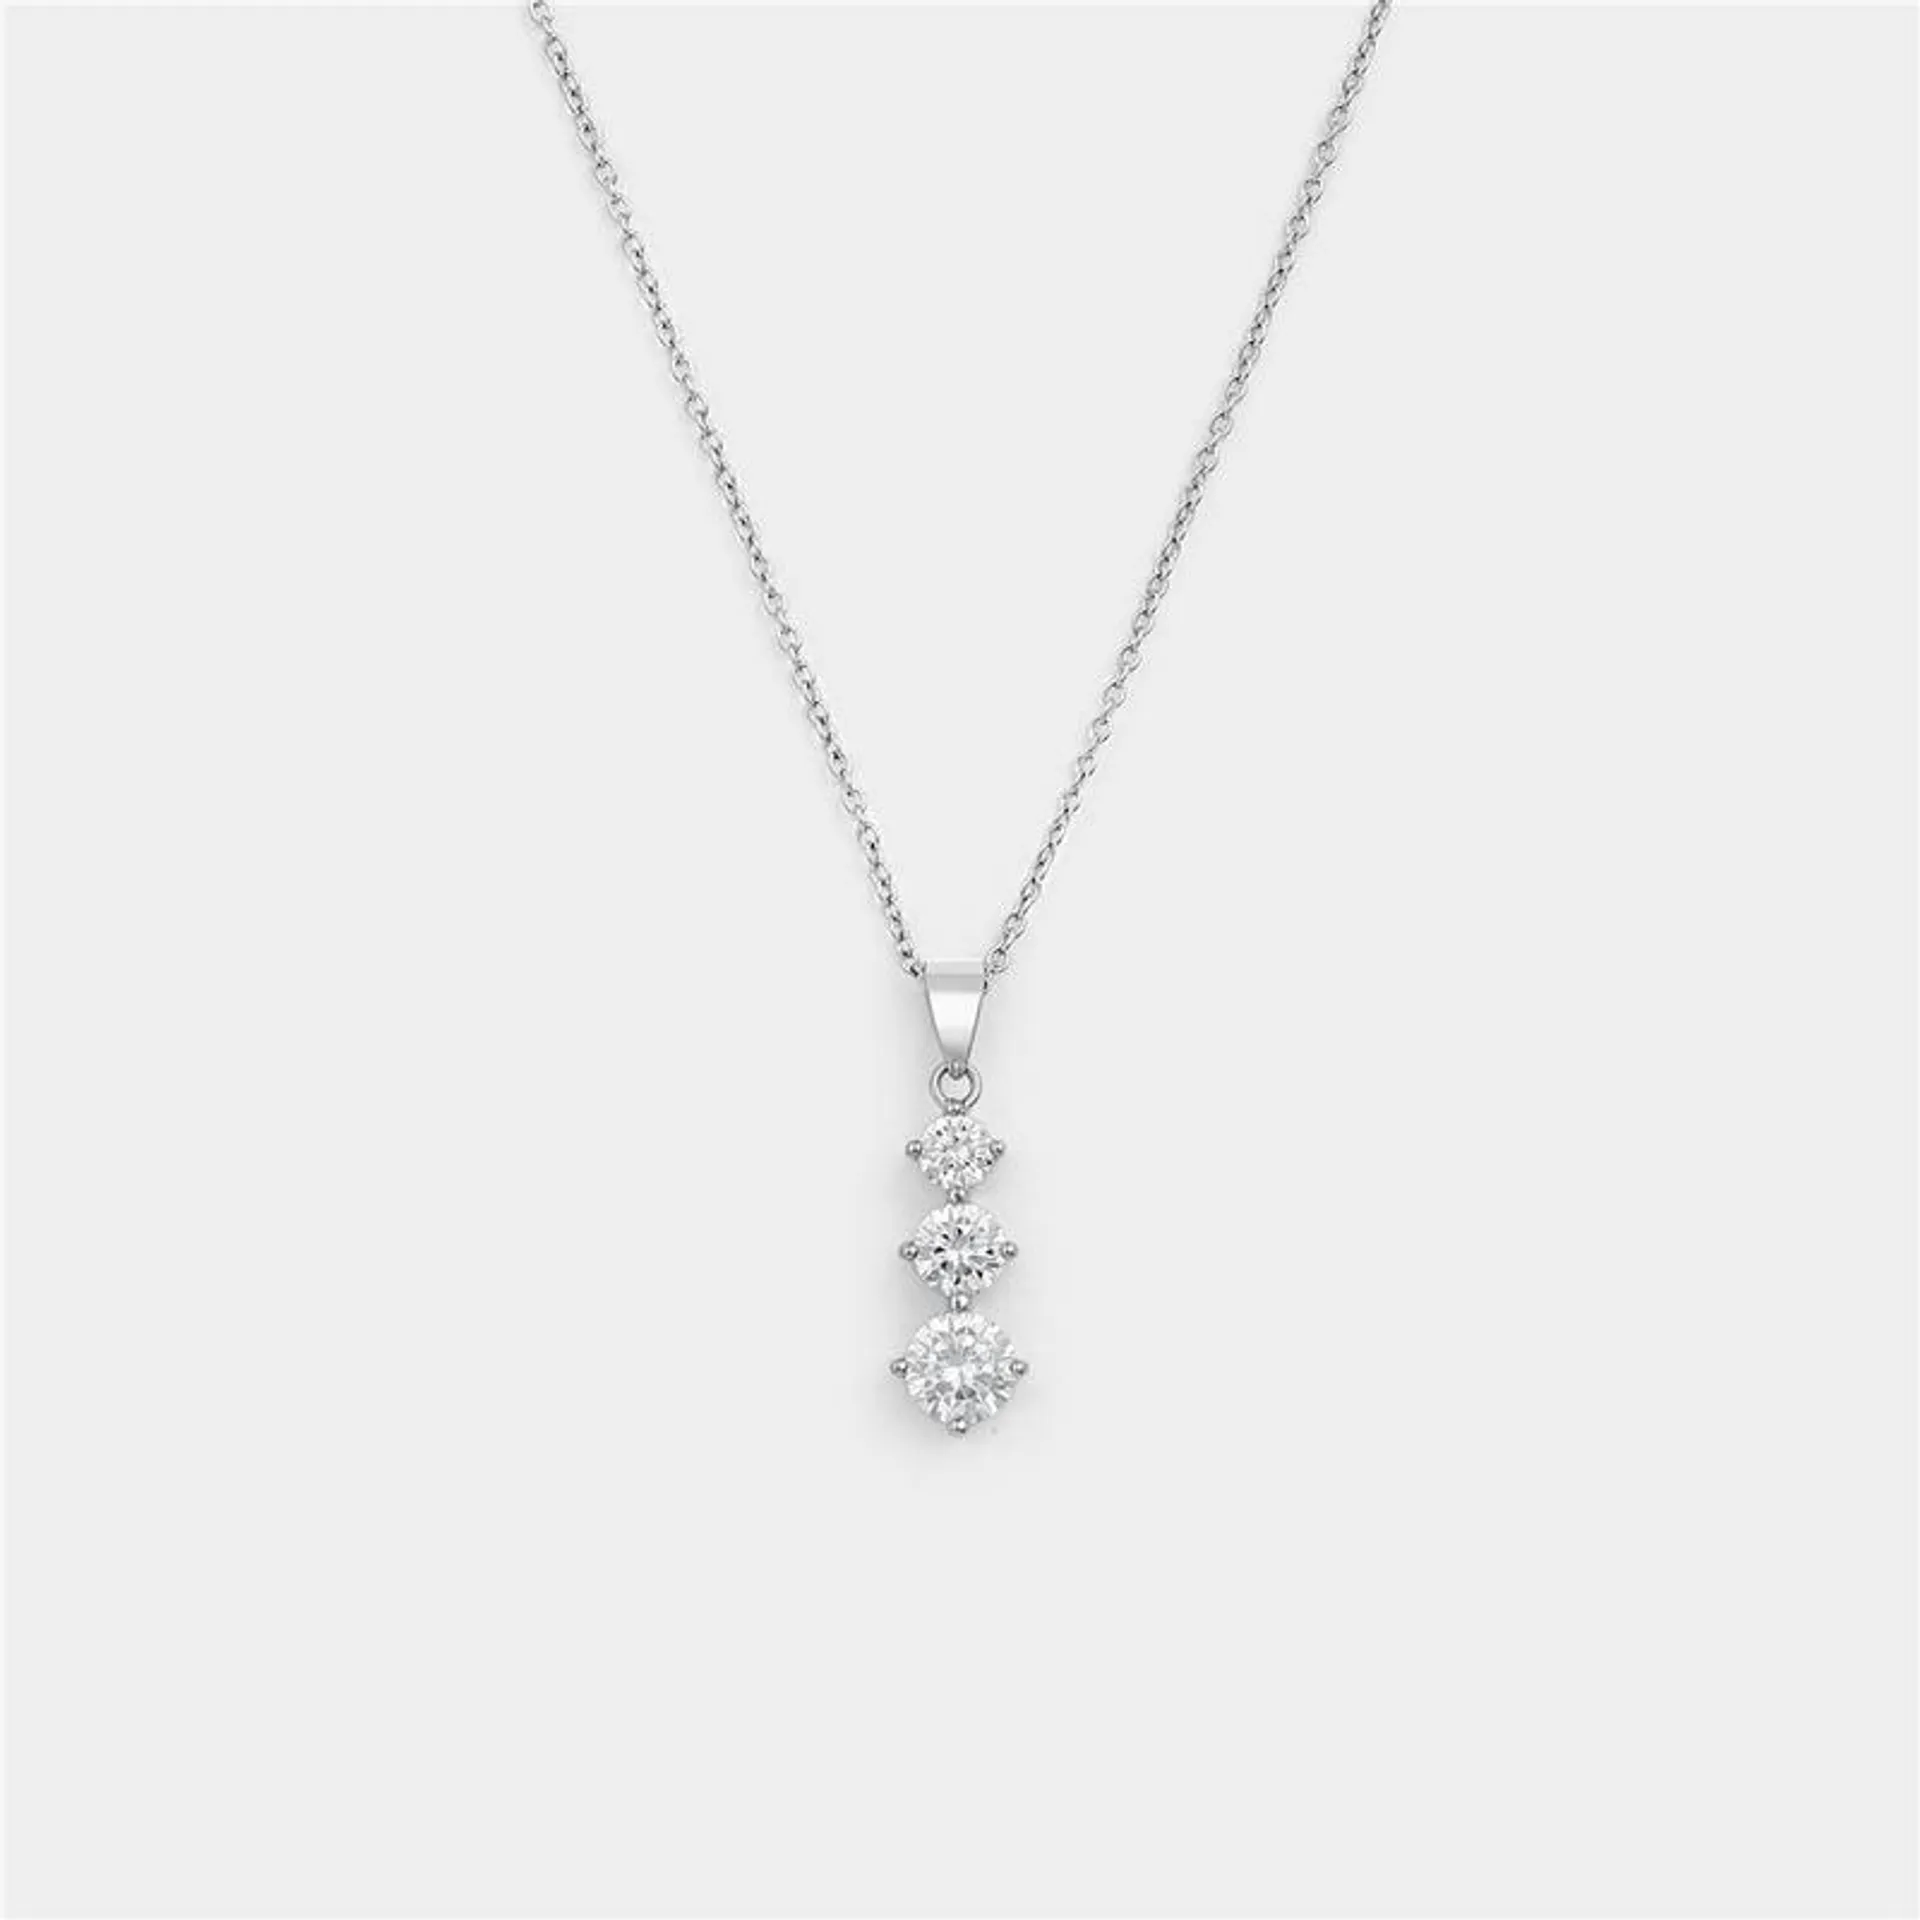 Sterling Silver Cubic Zirconia Trilogy Pendant